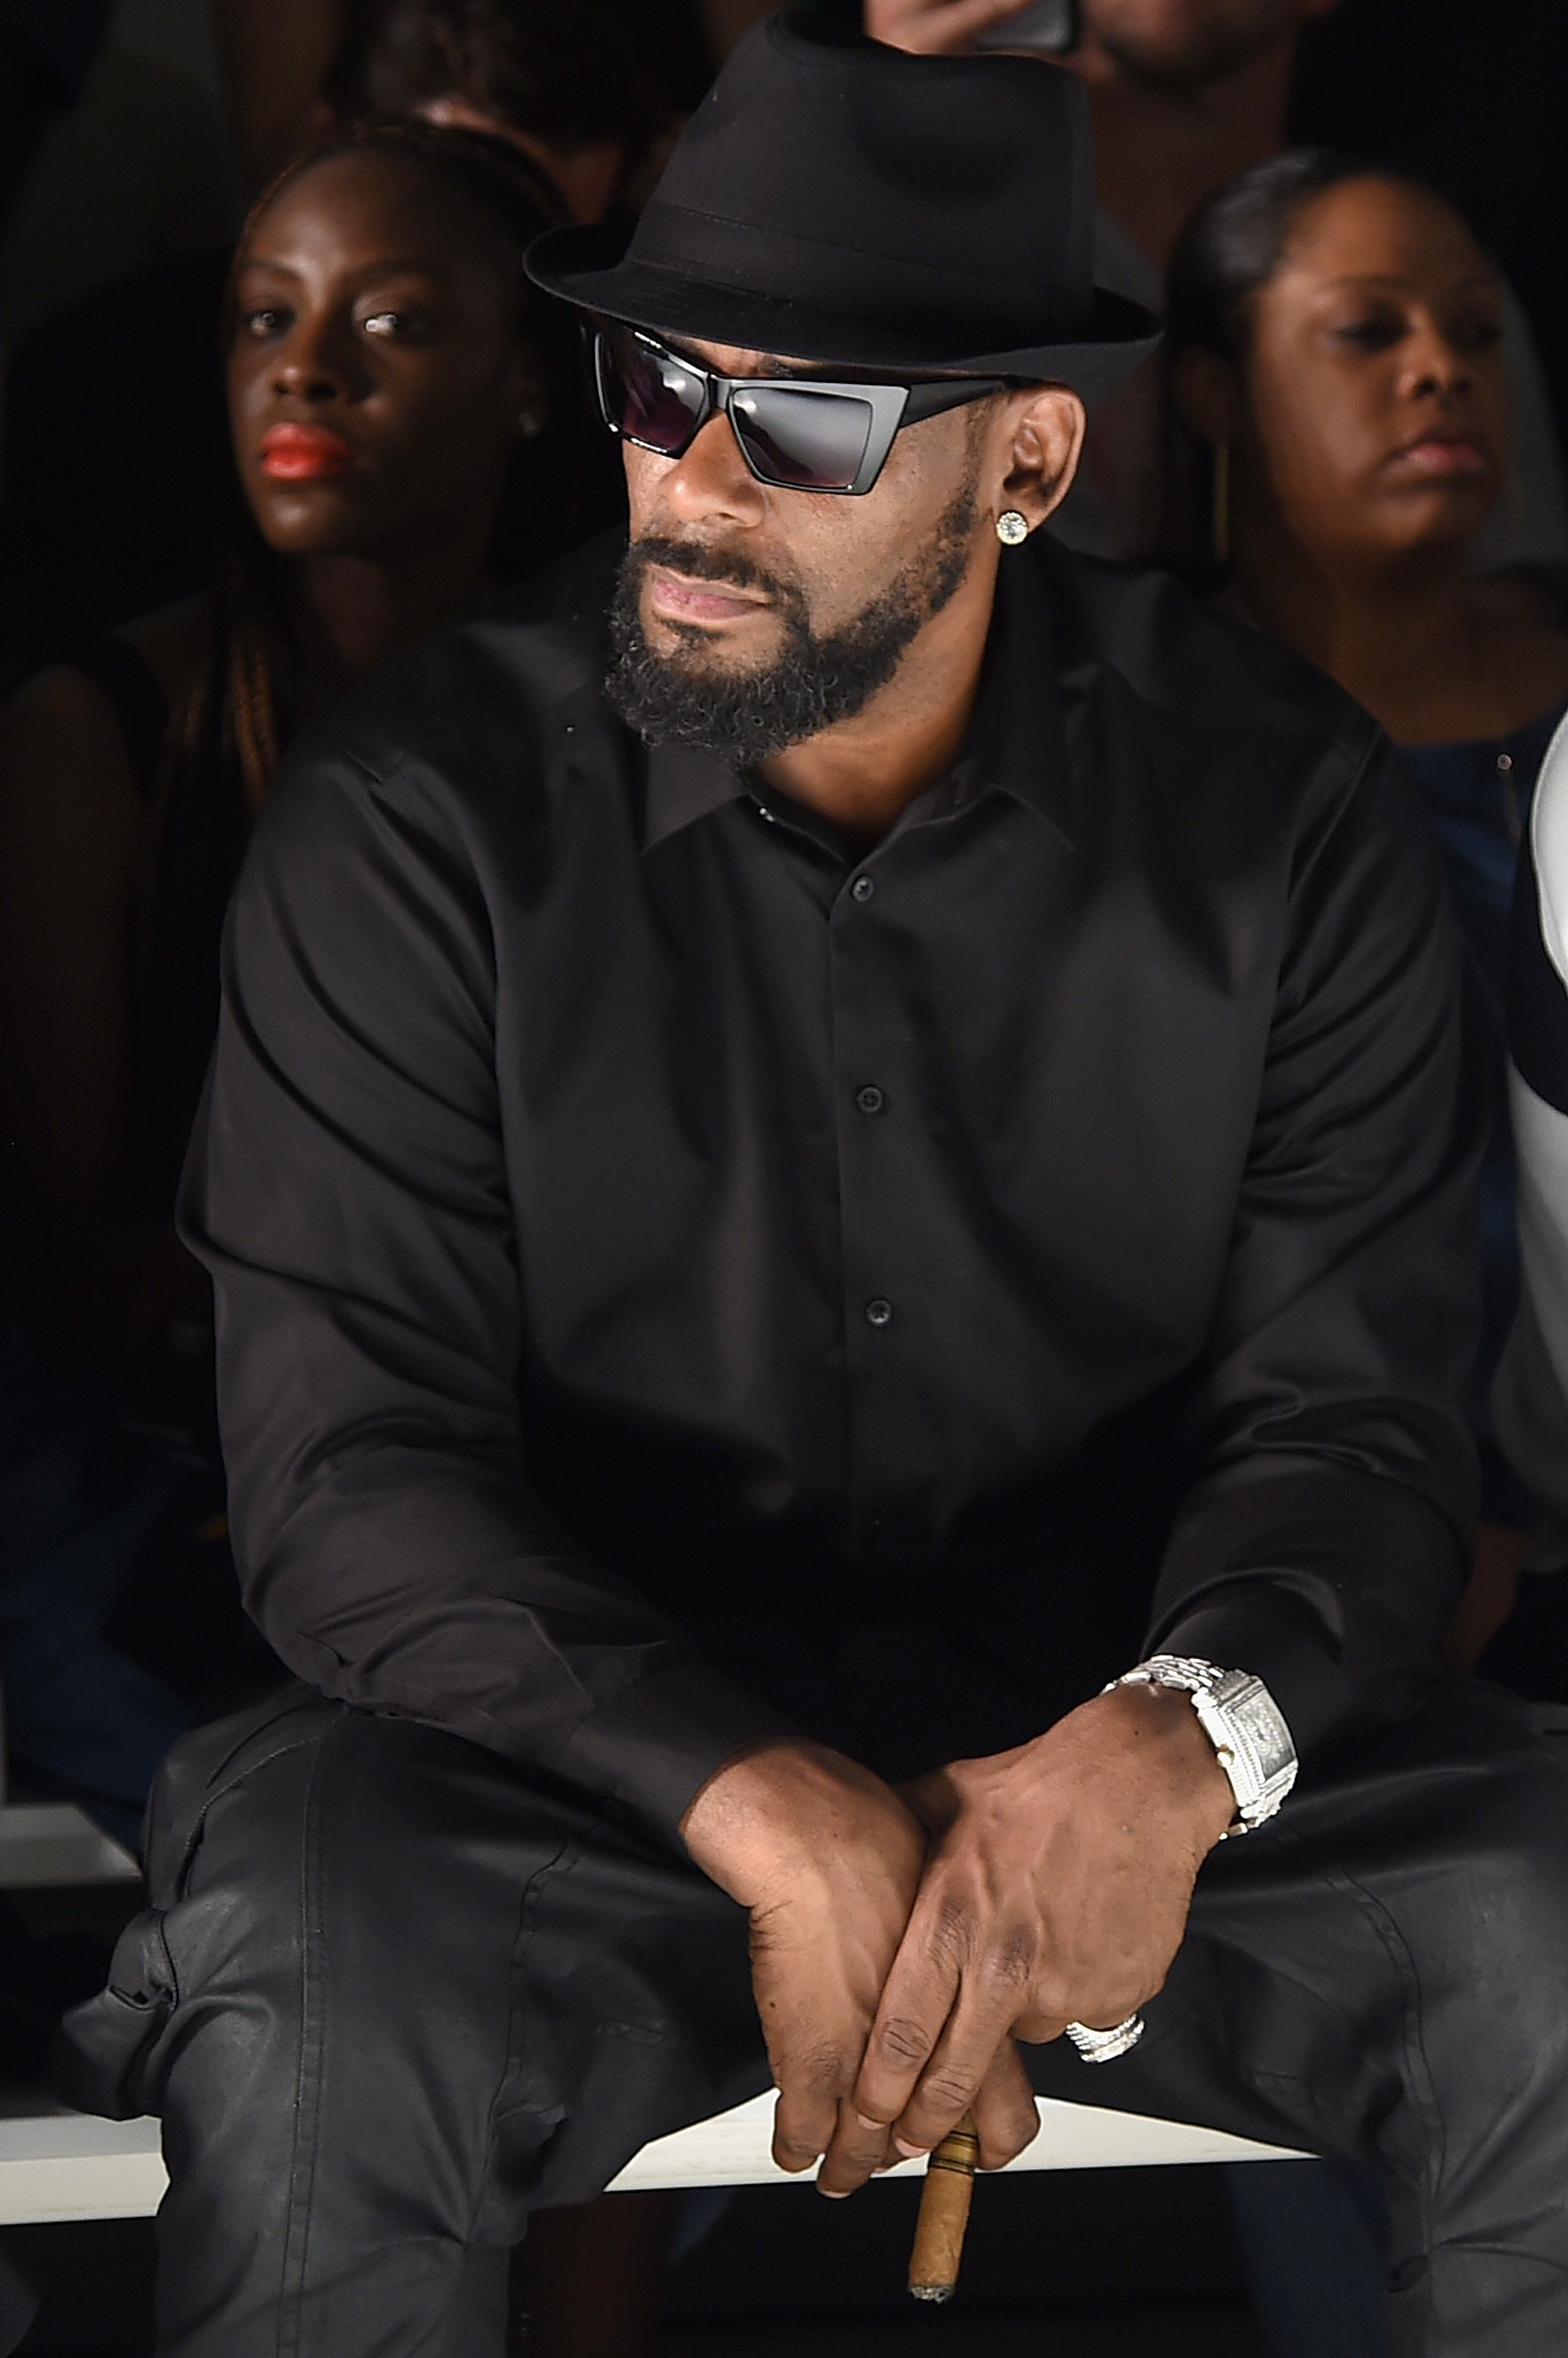  R. Kelly attends the Ovadia & Sons fashion show in 2016. | Photo: GettyImages/Global Images of Ukraine